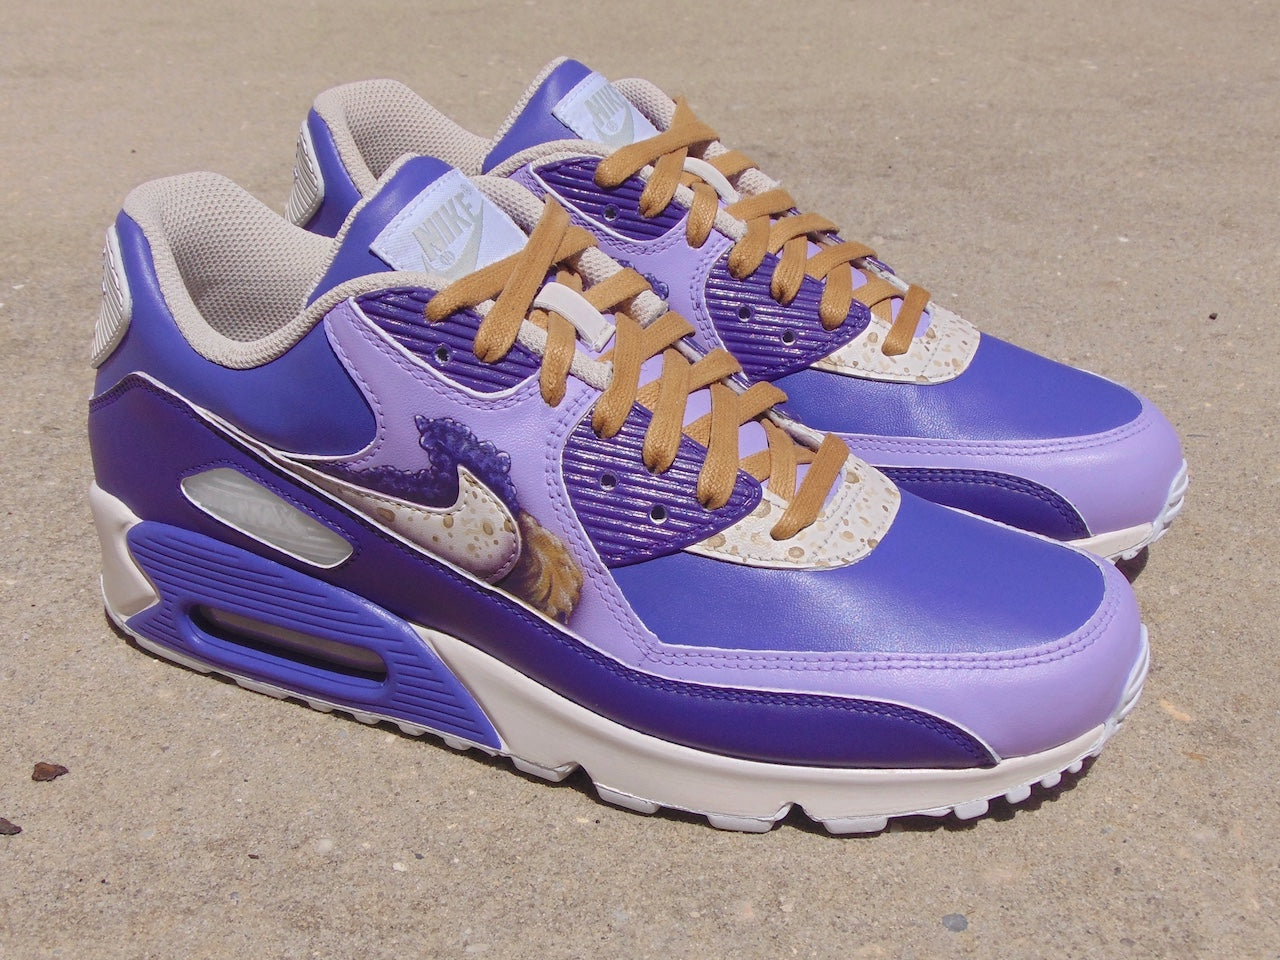 Peanut Butter and Jelly Nike Air Max 90 Leather Custom Painted Shoes